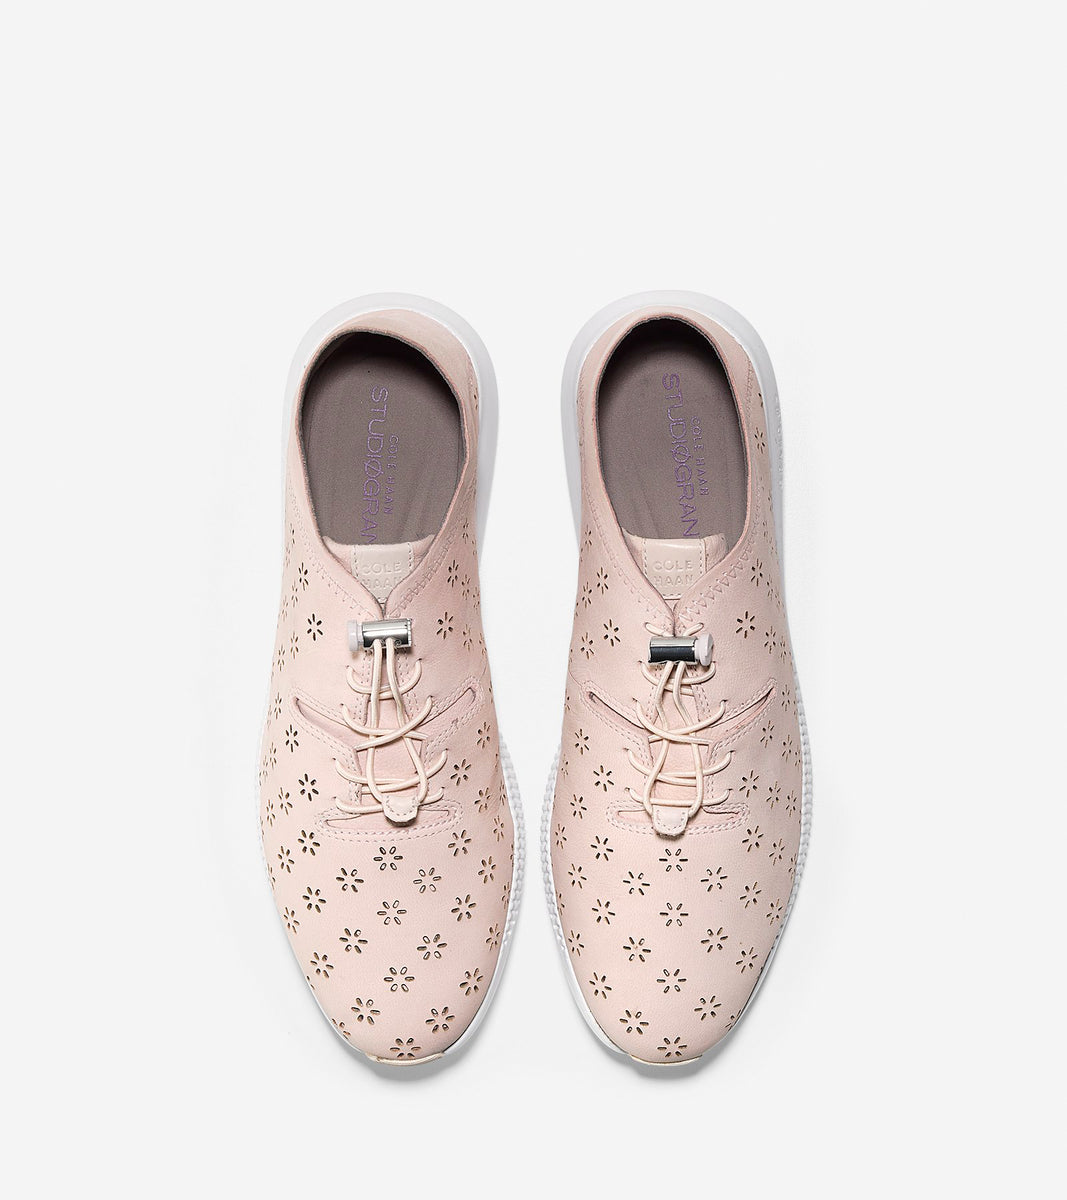 ColeHaan-StudiøGrand Pack-and-Go Sneaker-w10577-Peach Blush Perforated-optic White